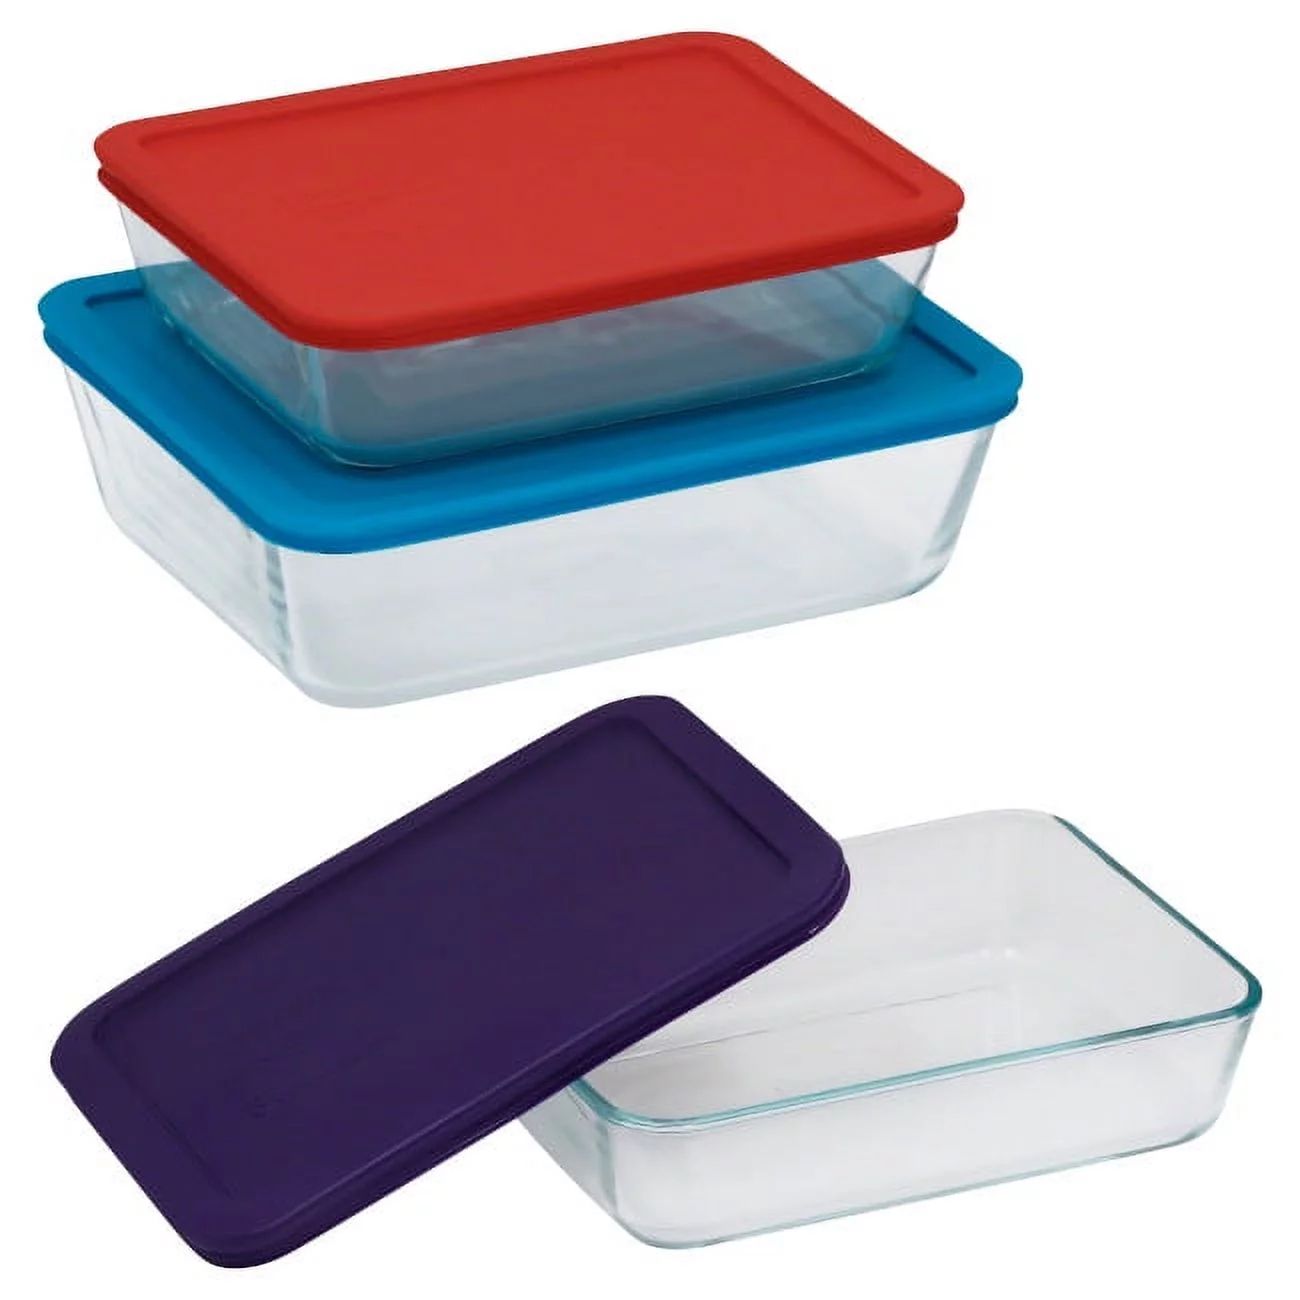 Pyrex Simply Store Glass Storage Container, Multi Color, 6 Piece | Walmart (US)